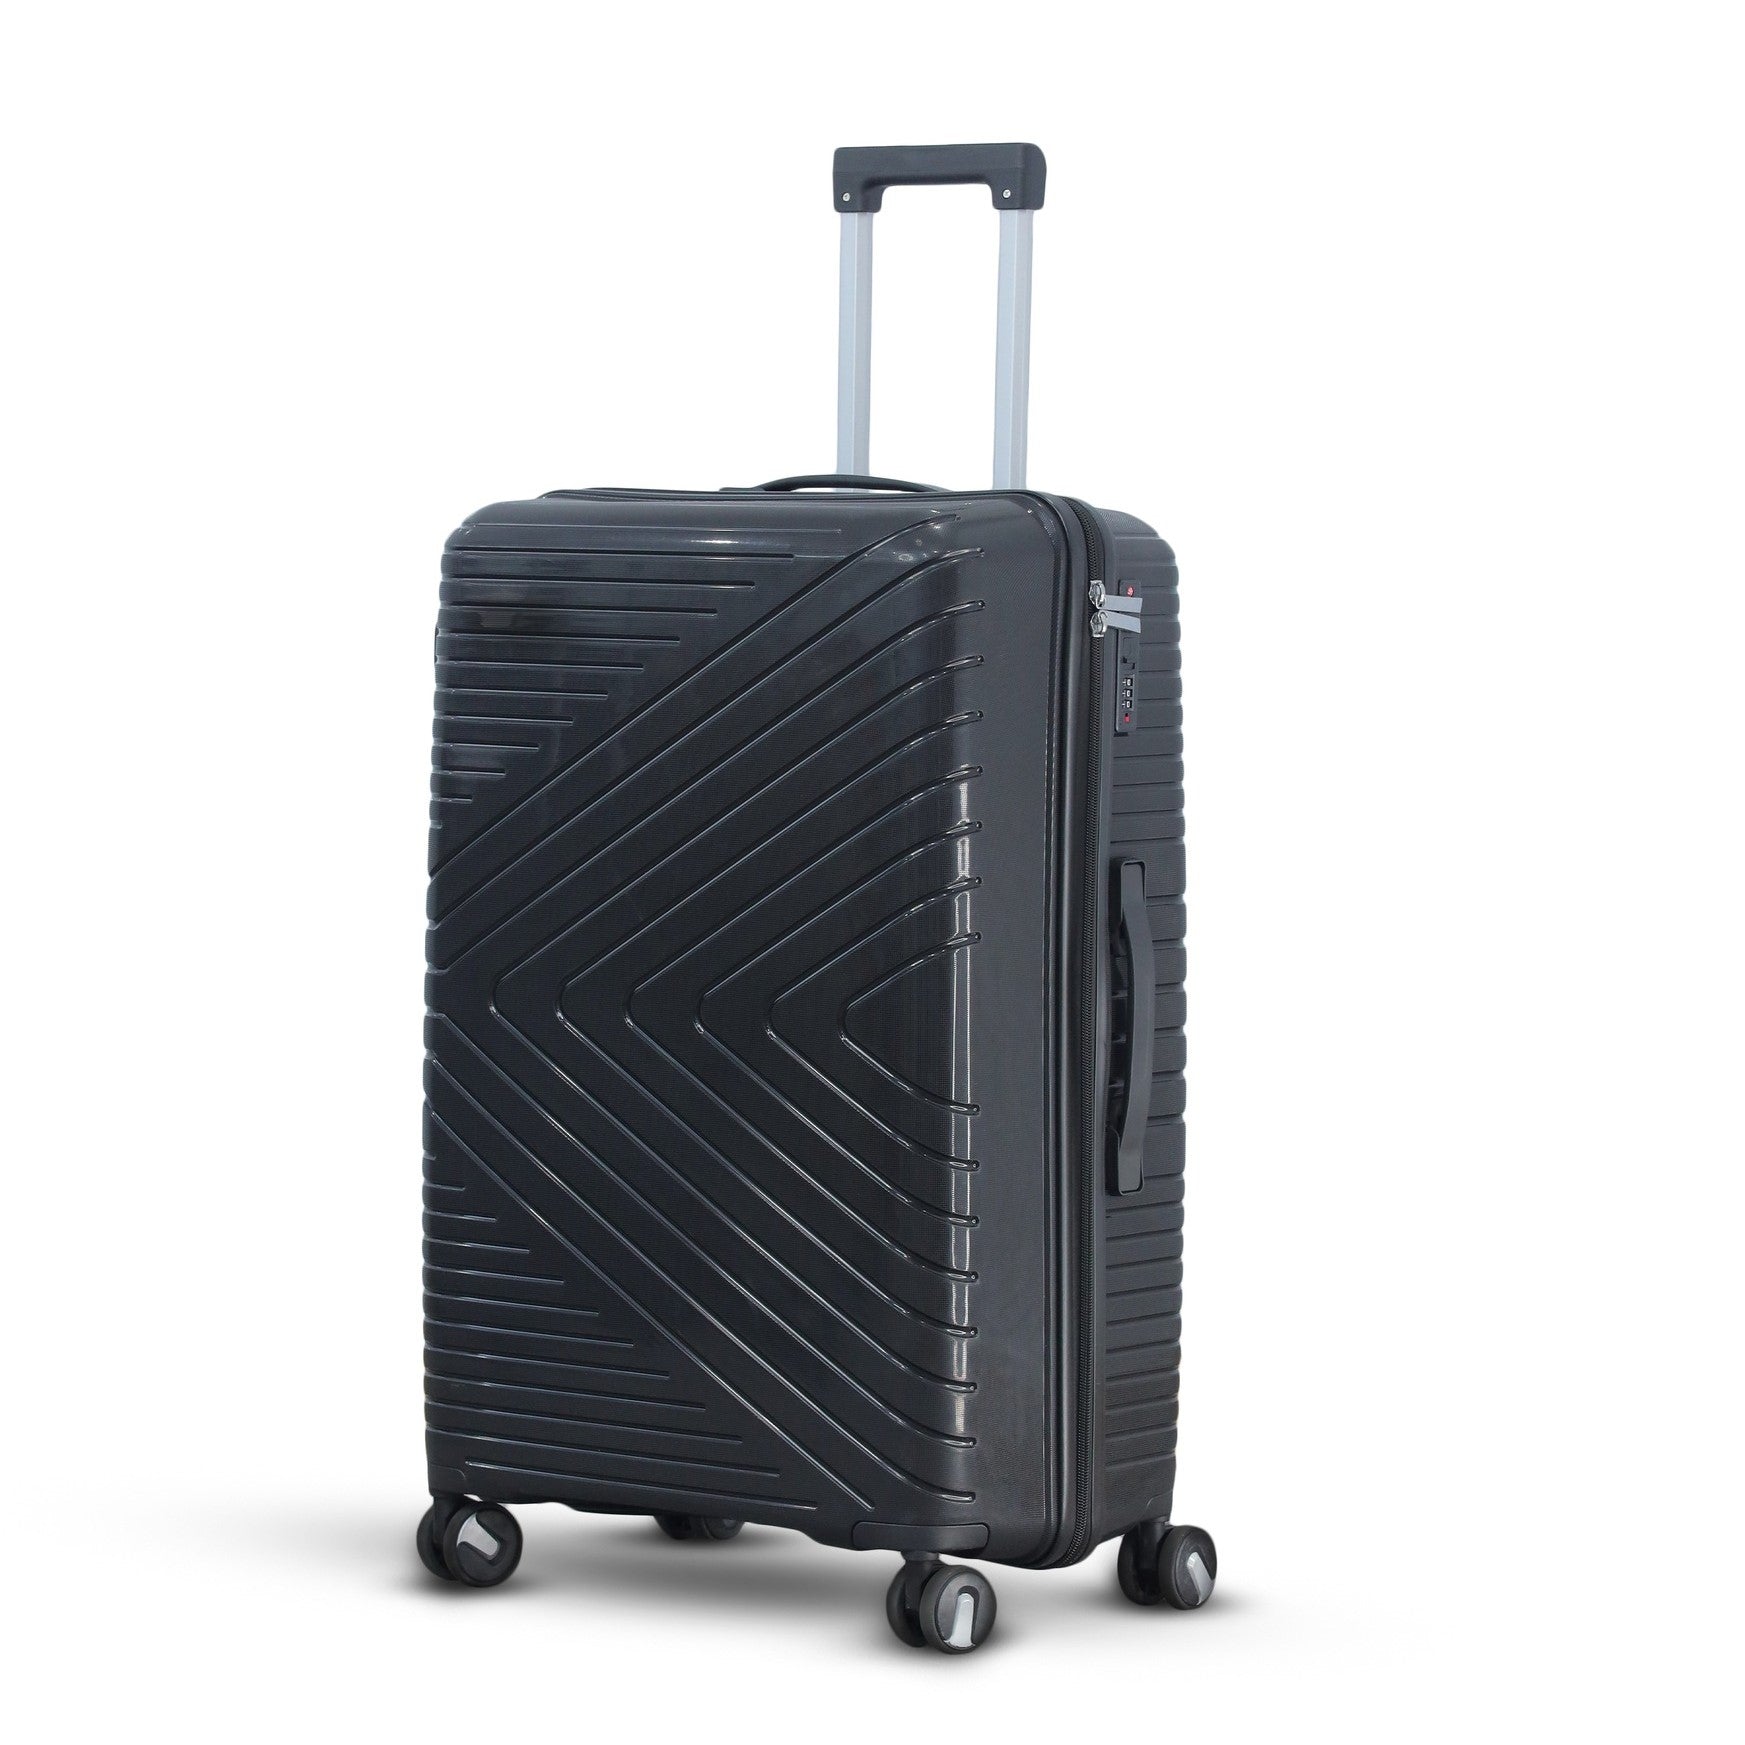 24" Crossline PP Unbreakable Luggage Bag With Double Spinner Wheel